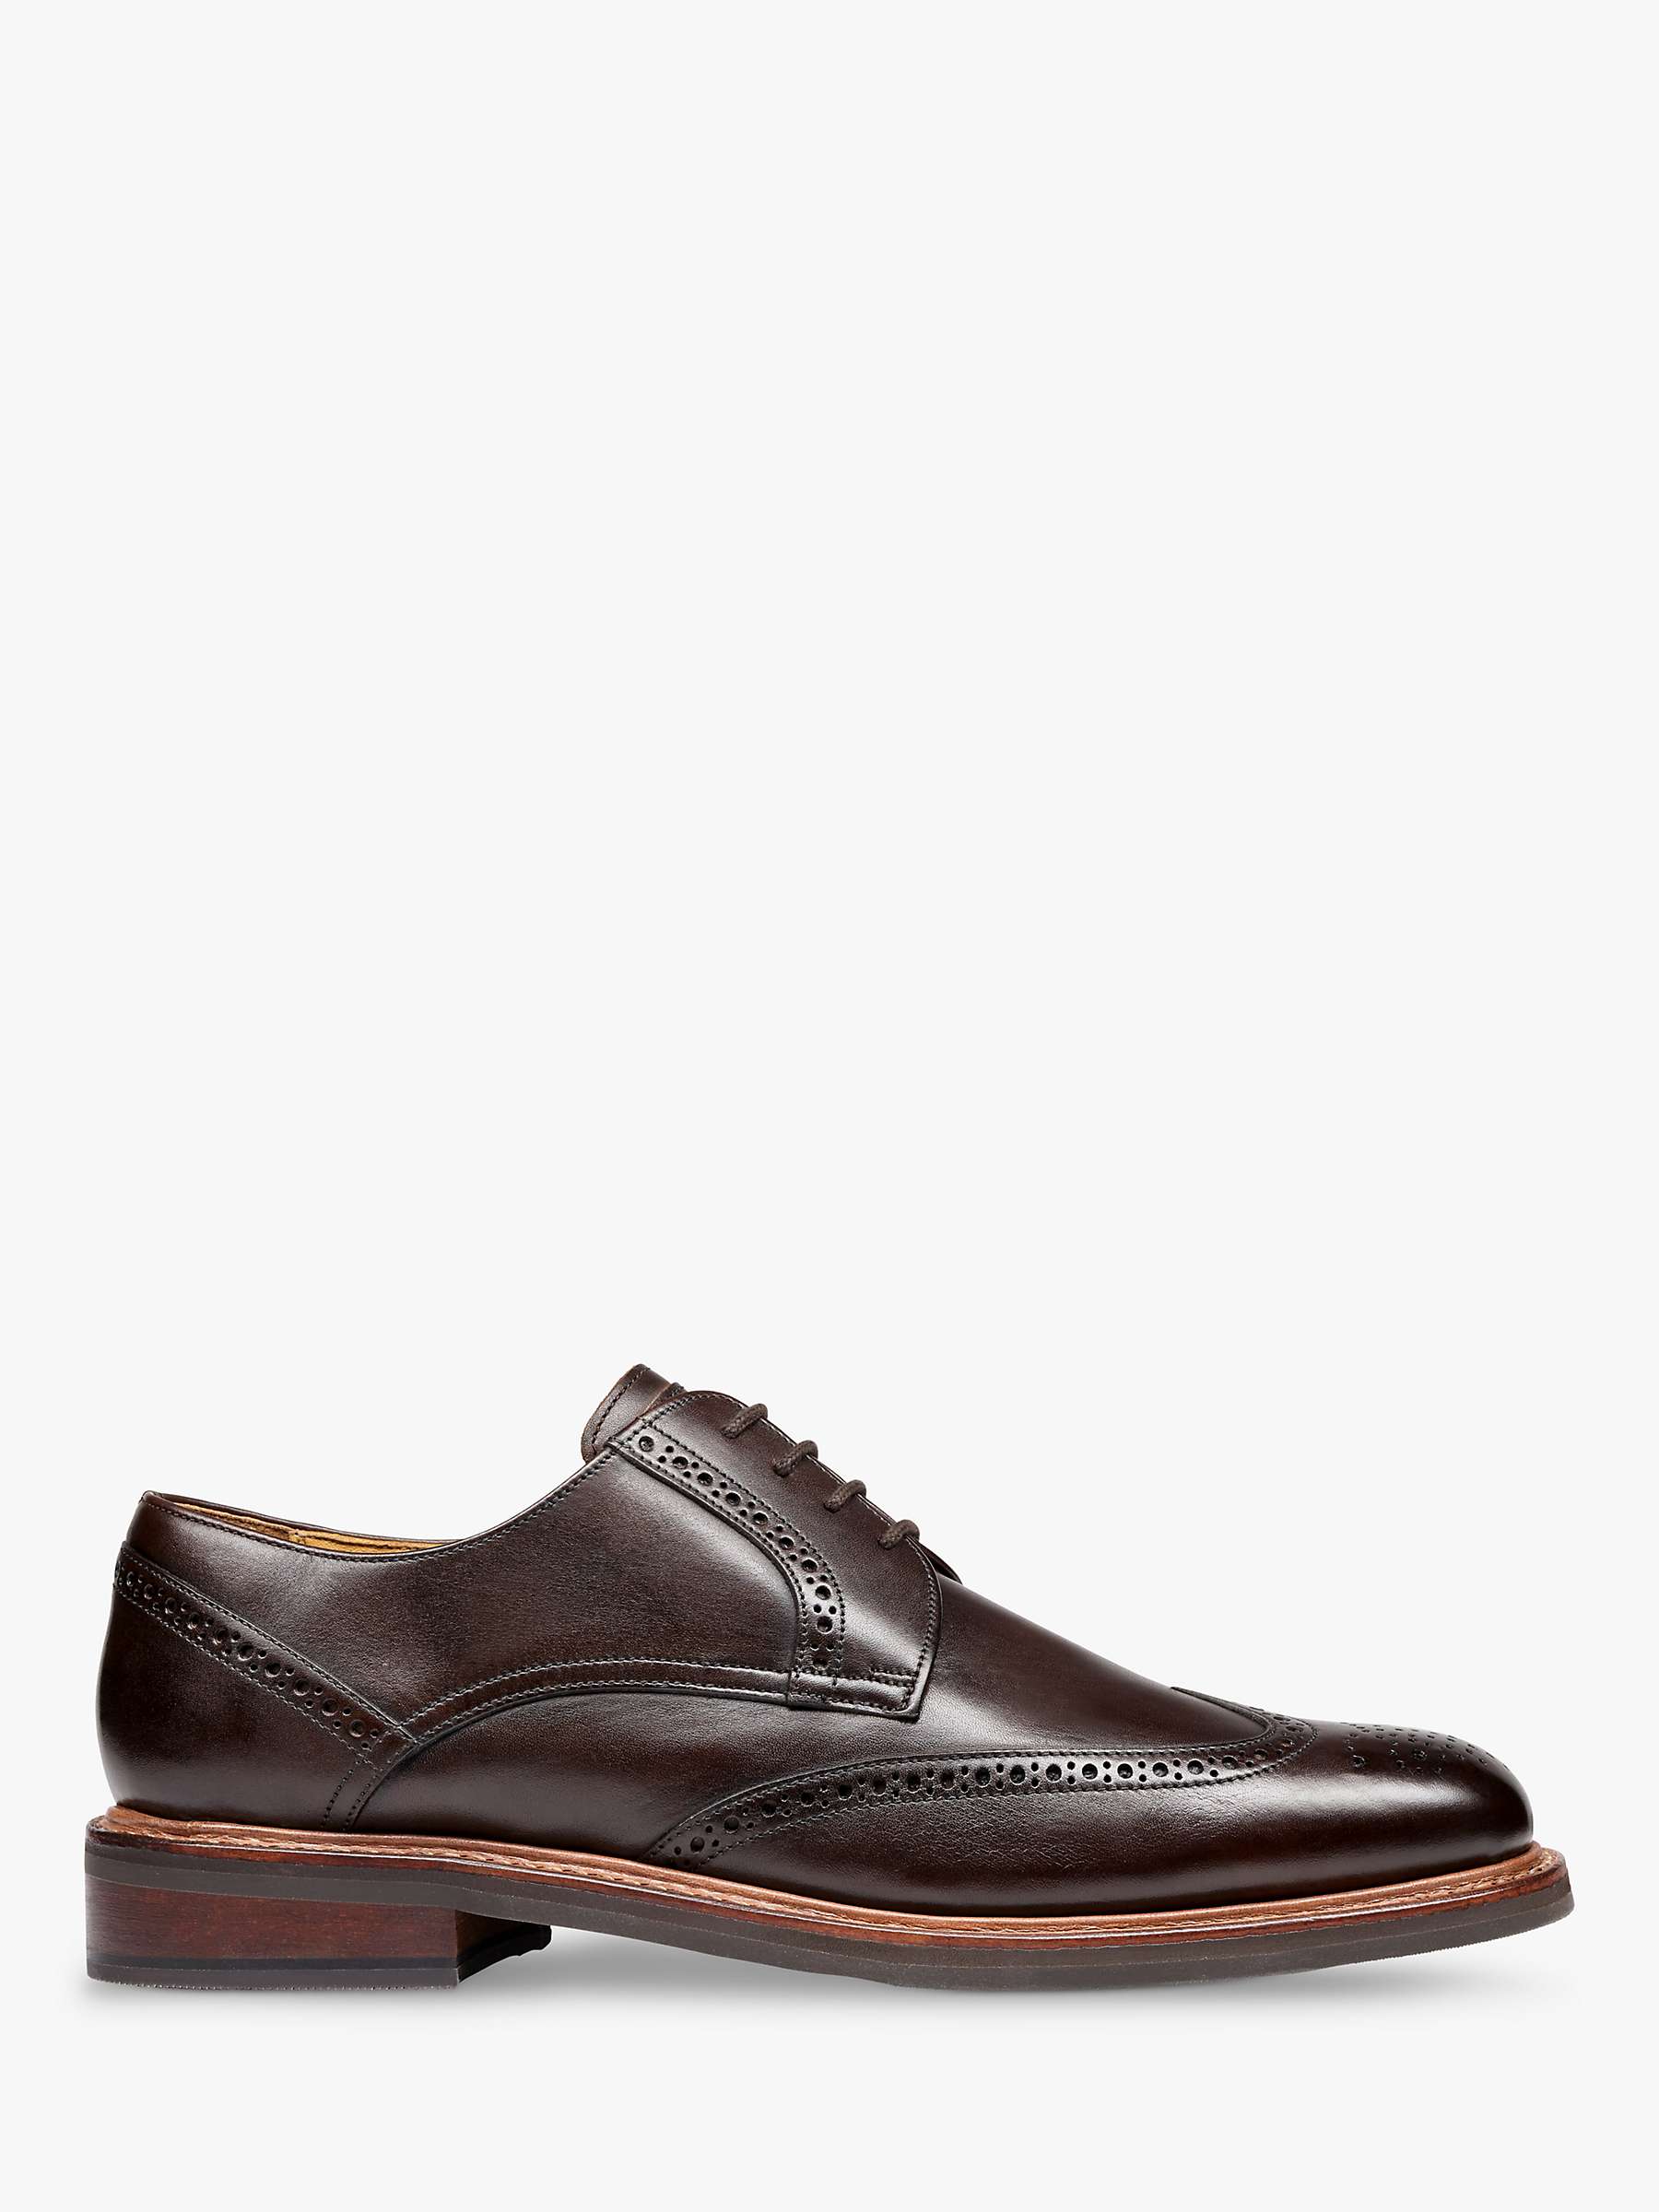 Buy Charles Tyrwhitt Lace Up Leather Derby Brogues, Dark Chocolate Online at johnlewis.com